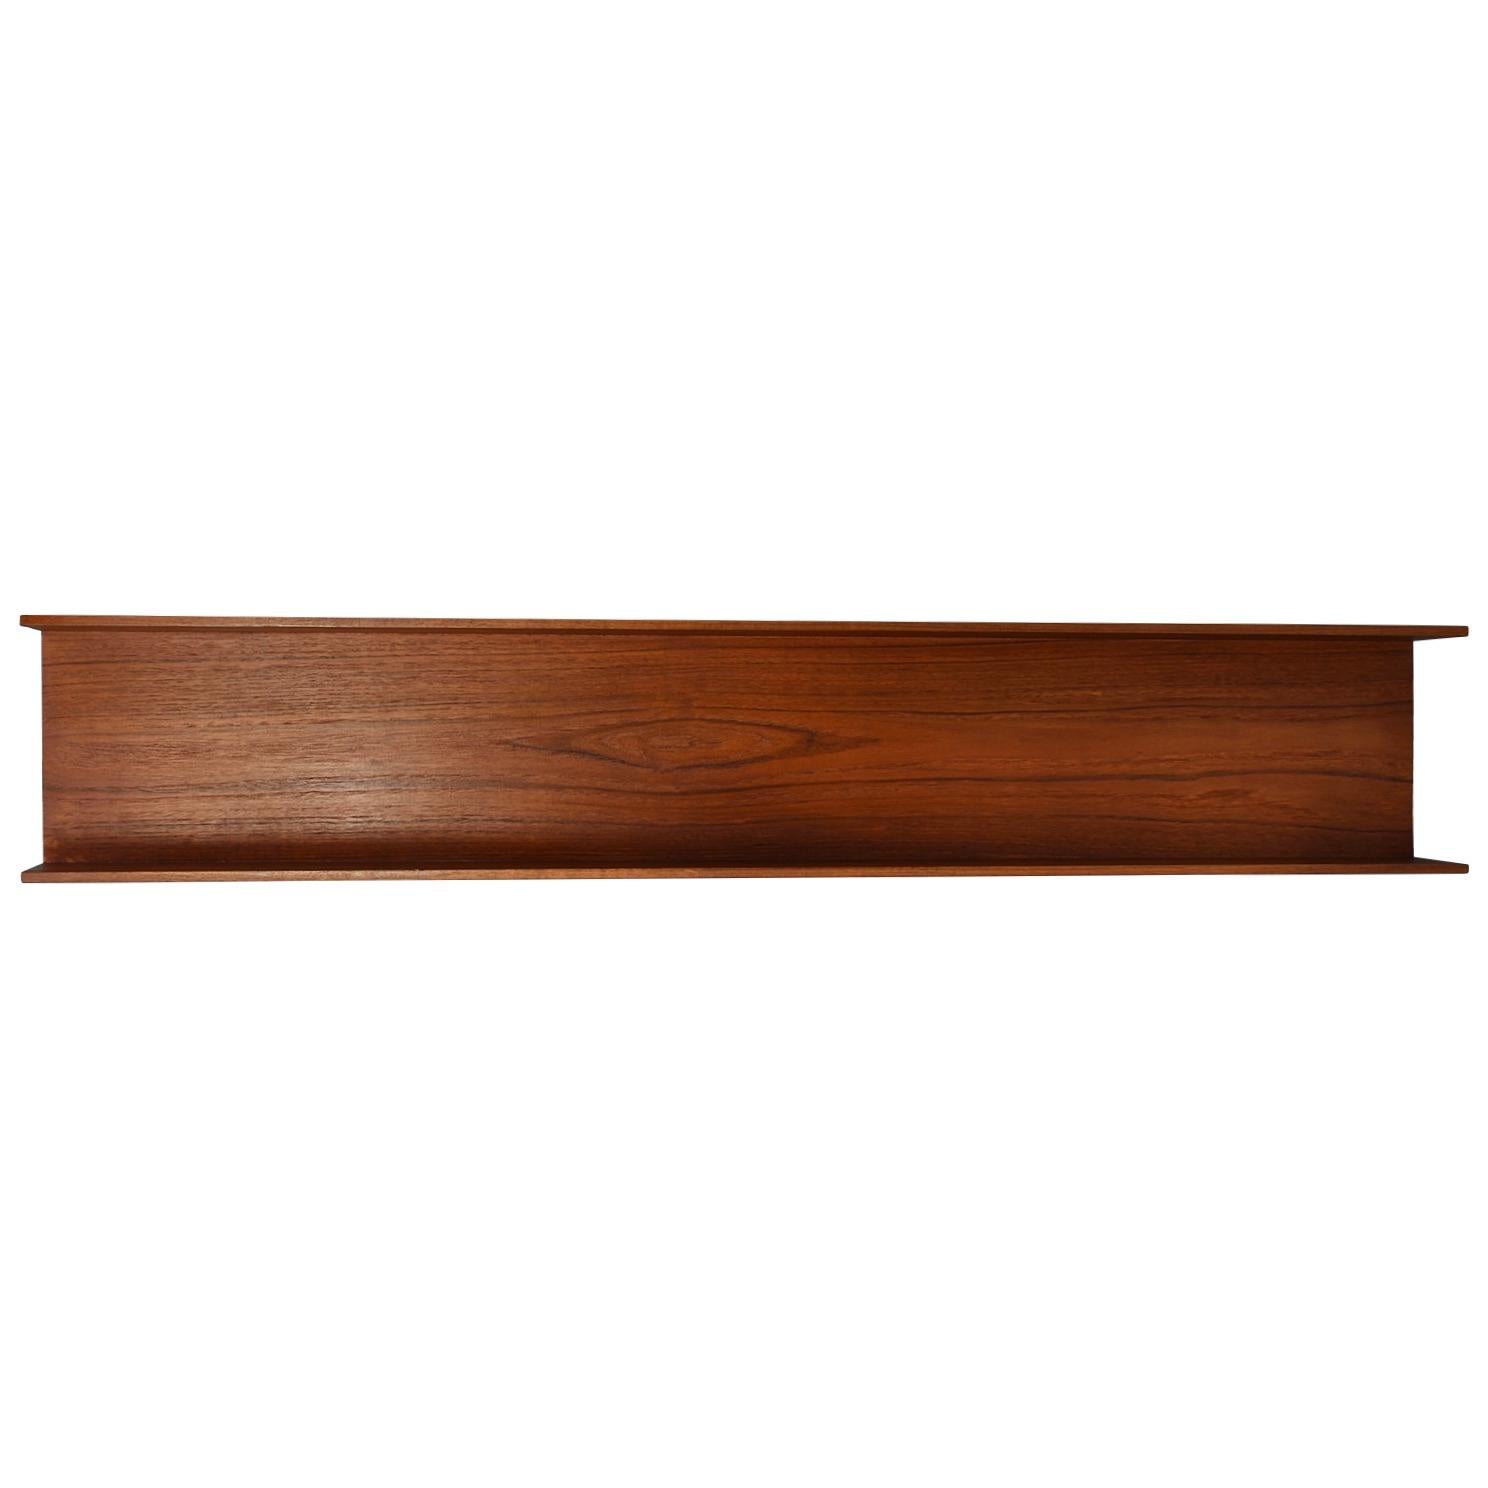 Pair of teak shelves by Walter Wirz for Wilhelm Renz, Germany, 1964. In very good condition. These pieces are period original (original old label on the back).

Designer: Walter Wirz

Manufacturer: Wilhelm Renz

Country: Germany

Model: